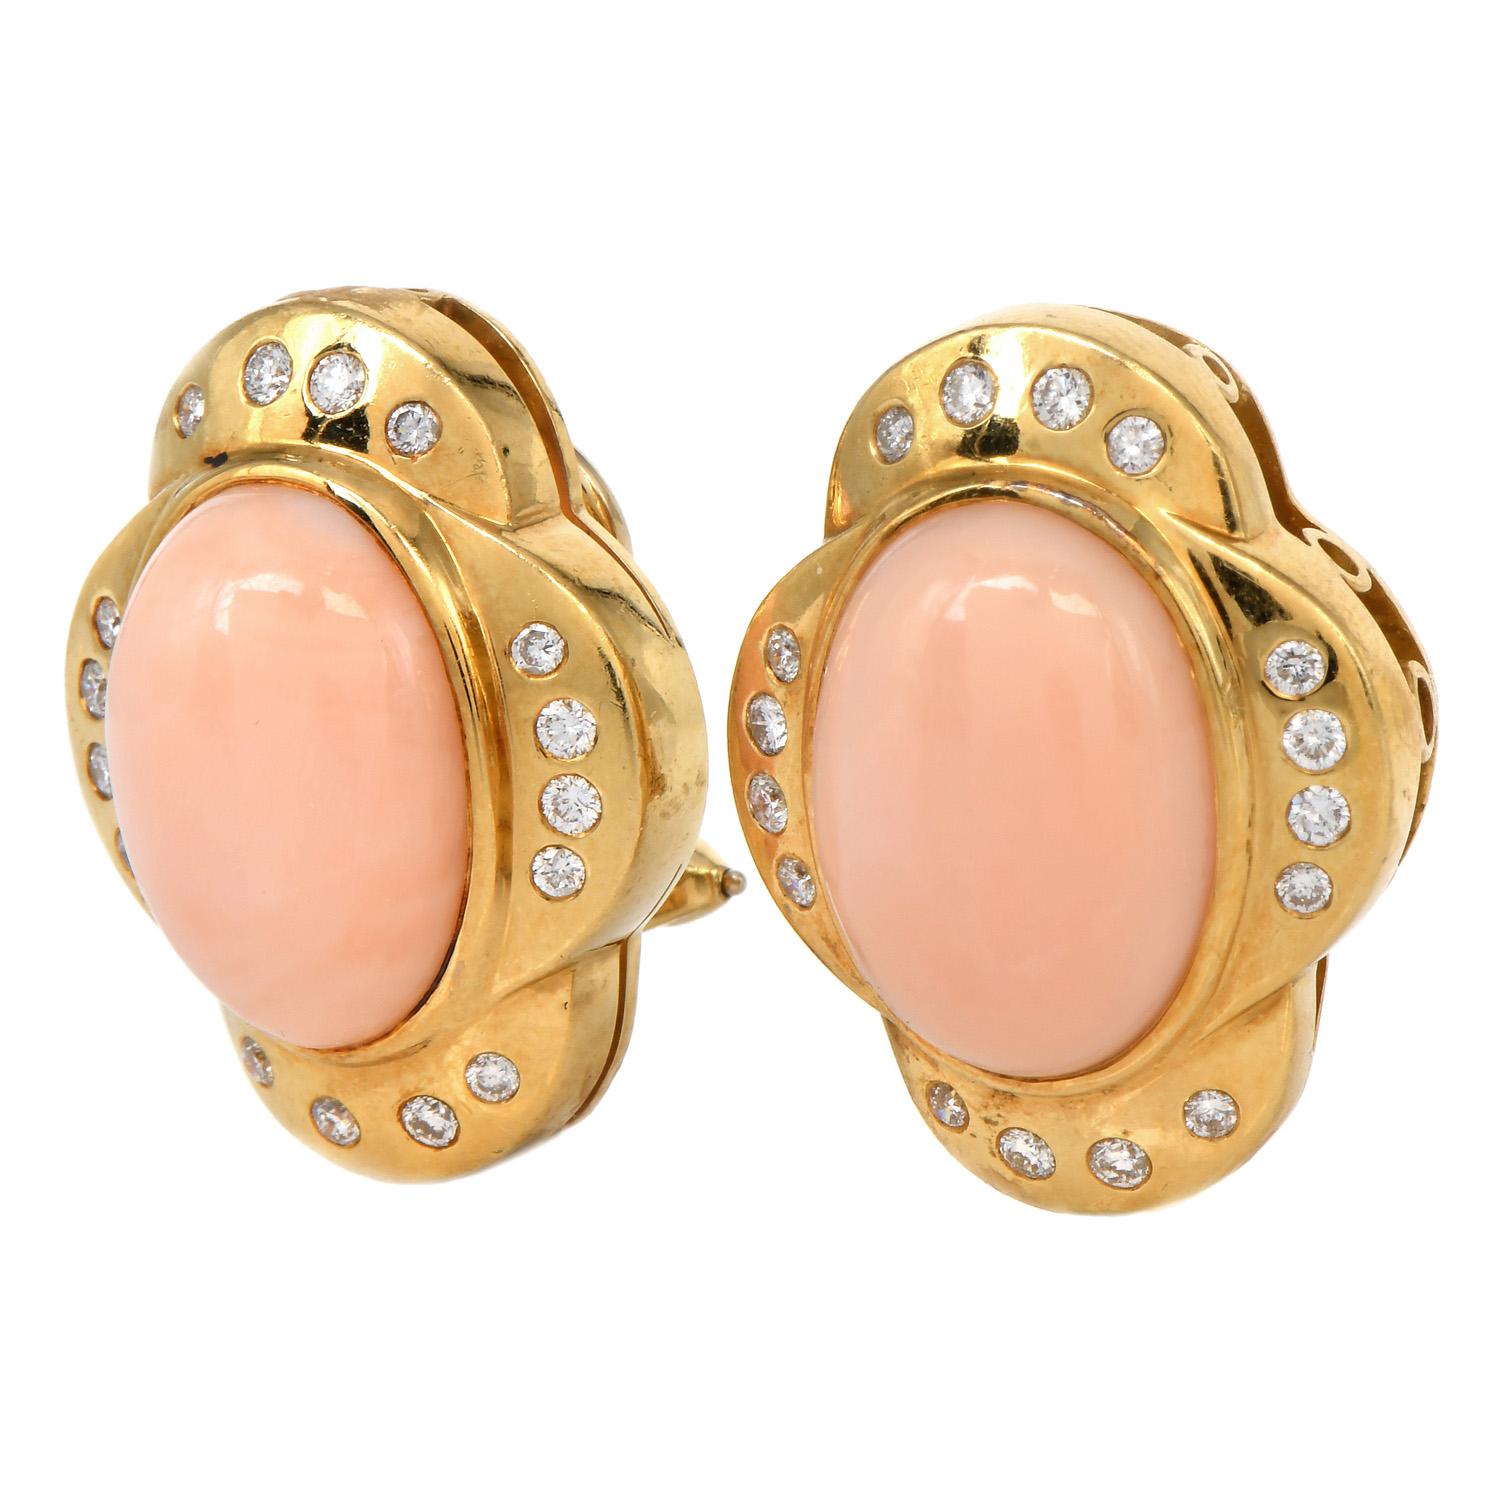 A nature's touch in these floral soft pink Natural Coral Earrings.

These 1990's Crafted in 18K yellow gold, each set with a cabochon genuine Soft Pink Genuine Coral, measuring 17.5 mm x 13 mm x 4.5 mm.

Adorning the highly polished surface are (32)